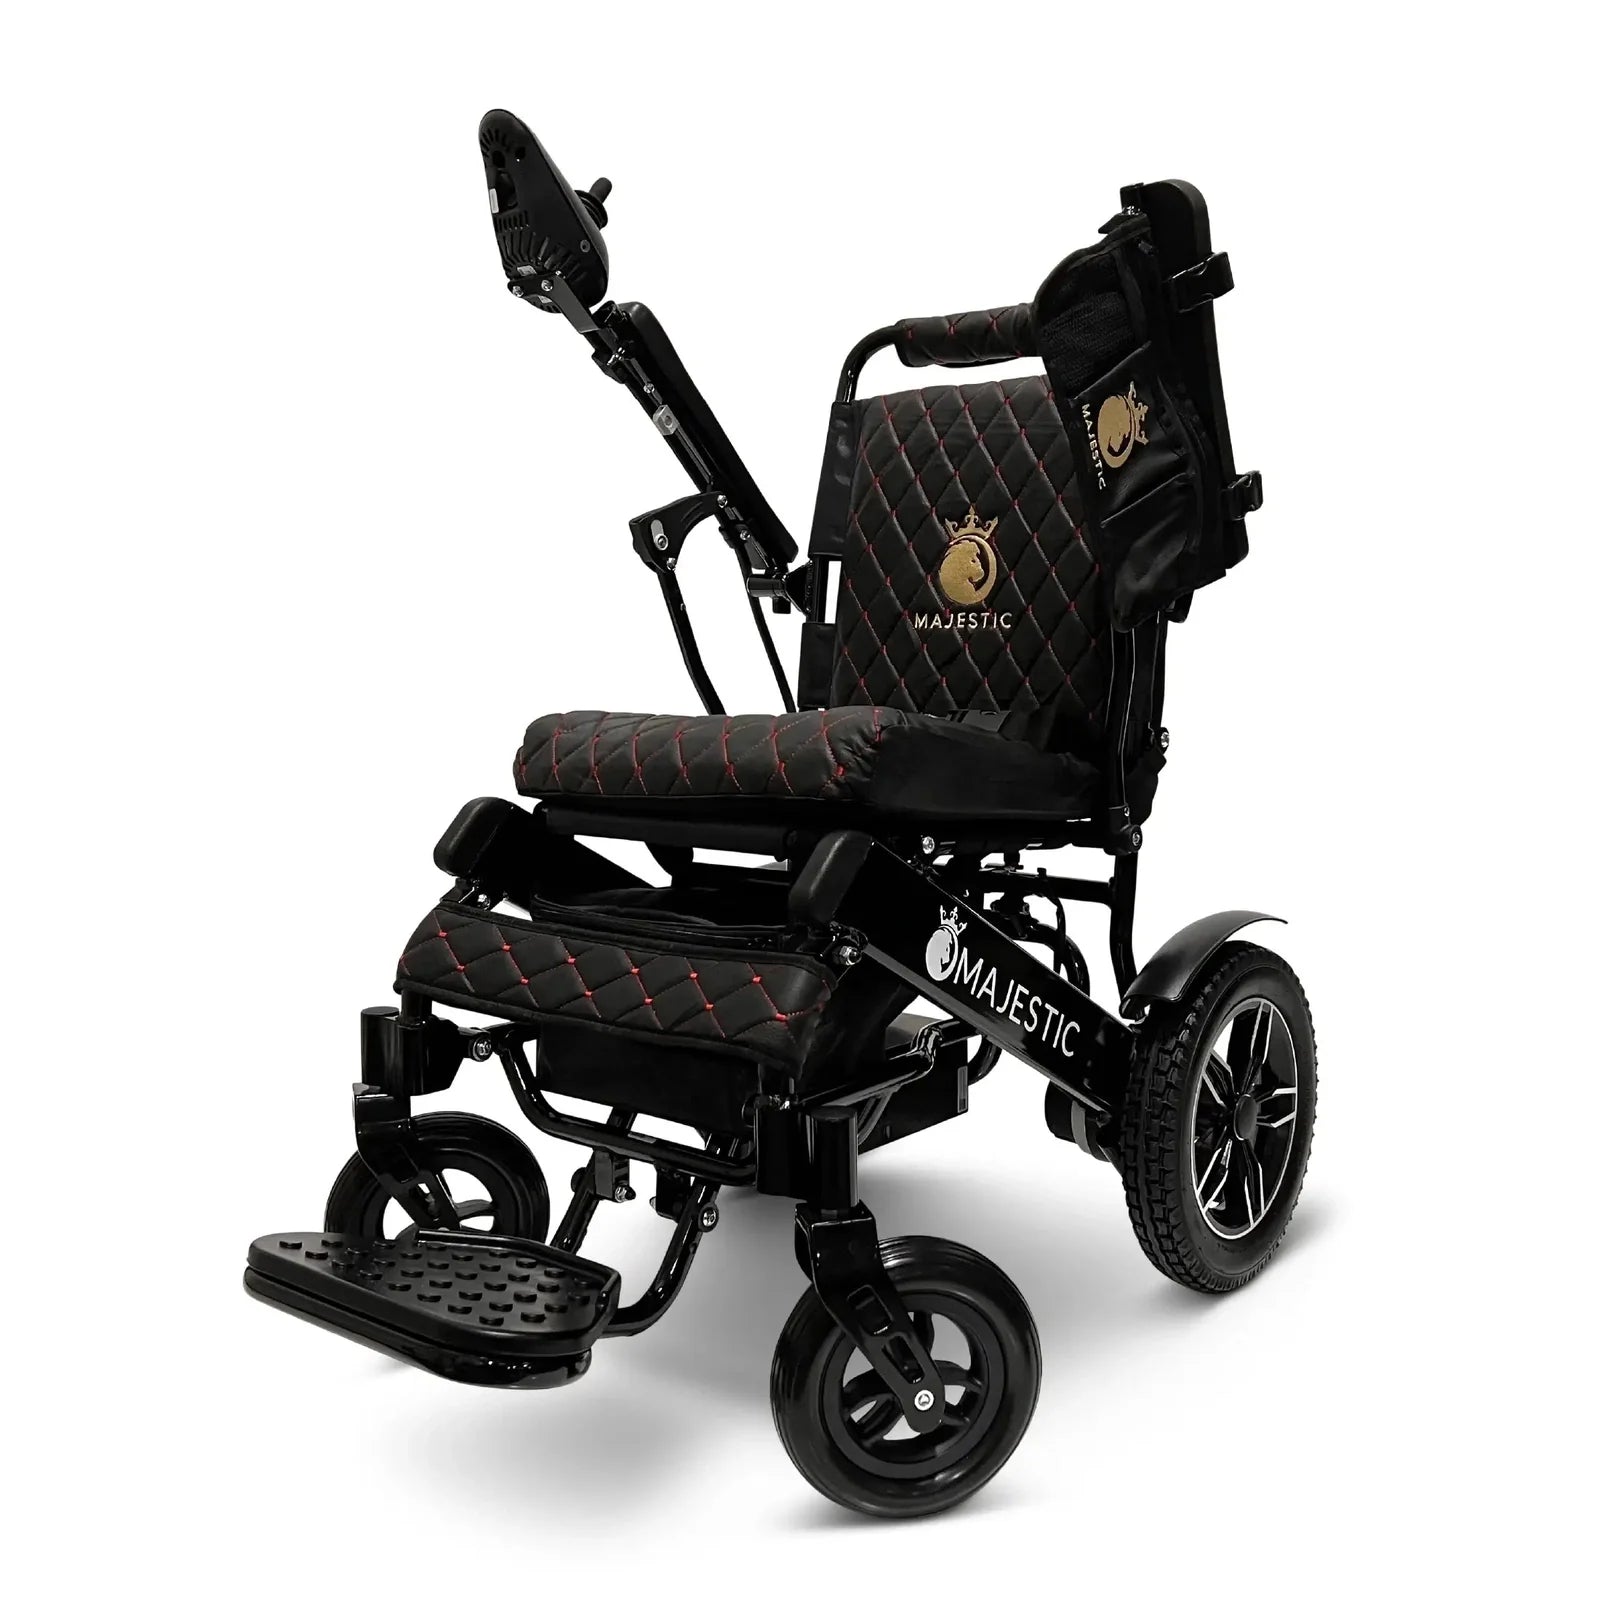 ComfyGO Majestic IQ-8000 Remote Controlled Lightweight Folding Electric Wheelchair Power Wheelchairs ComfyGO Black Black 10 Miles & 17.5" Seat Width